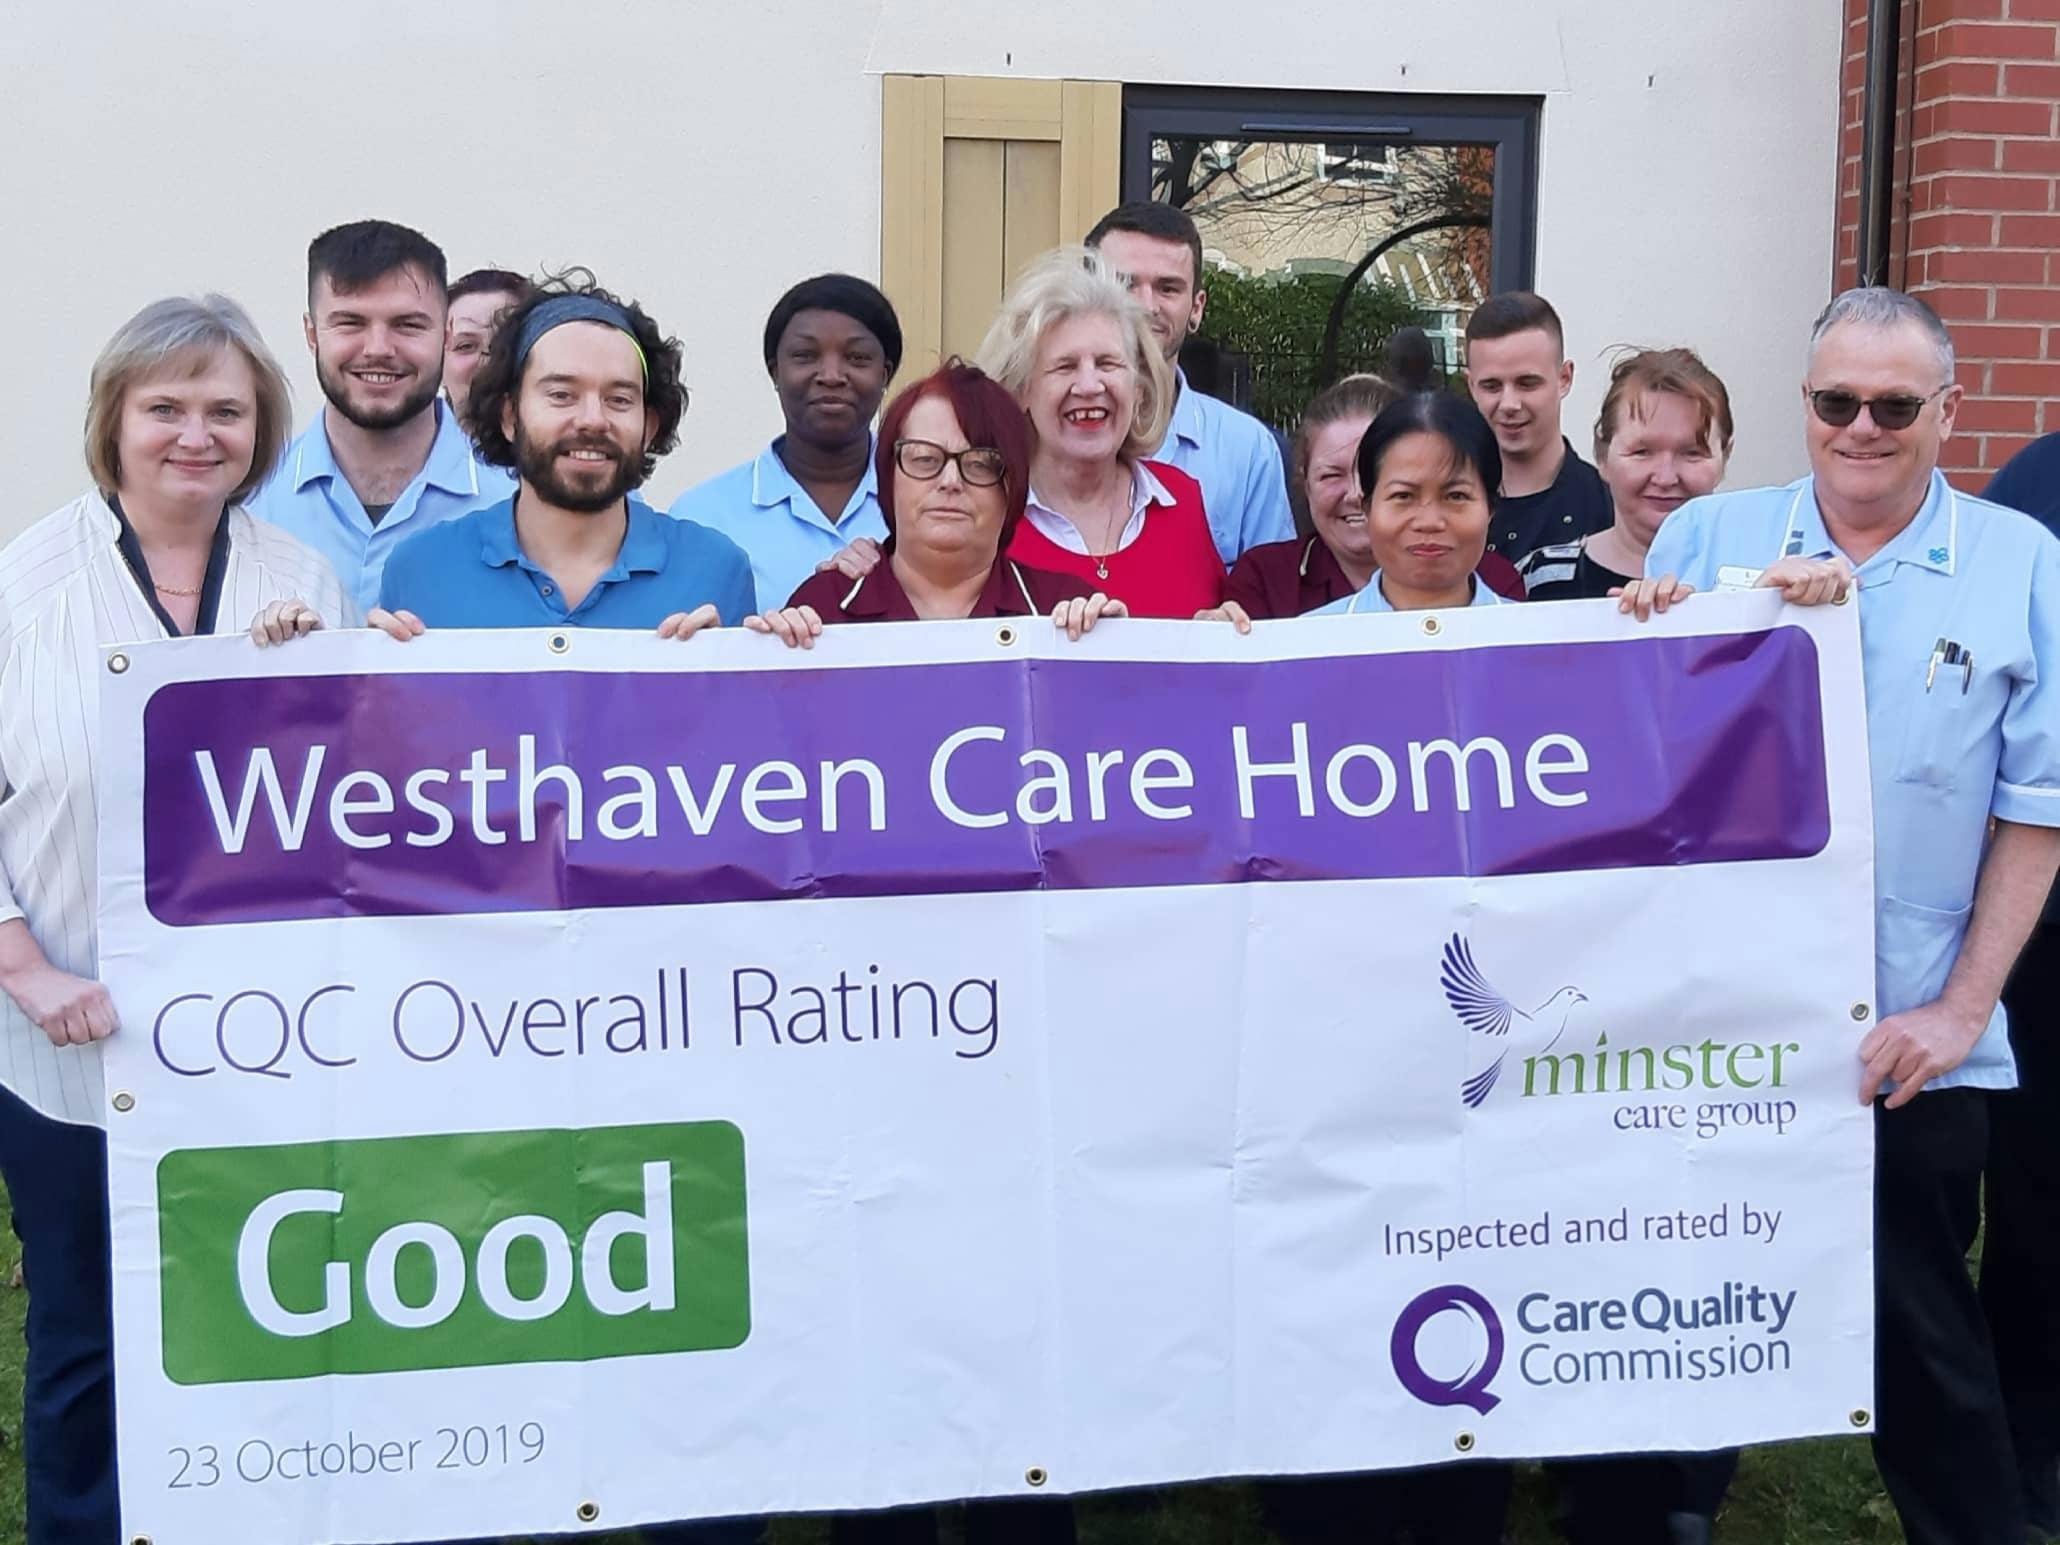 Carers at Westhaven Care Home in Wirral